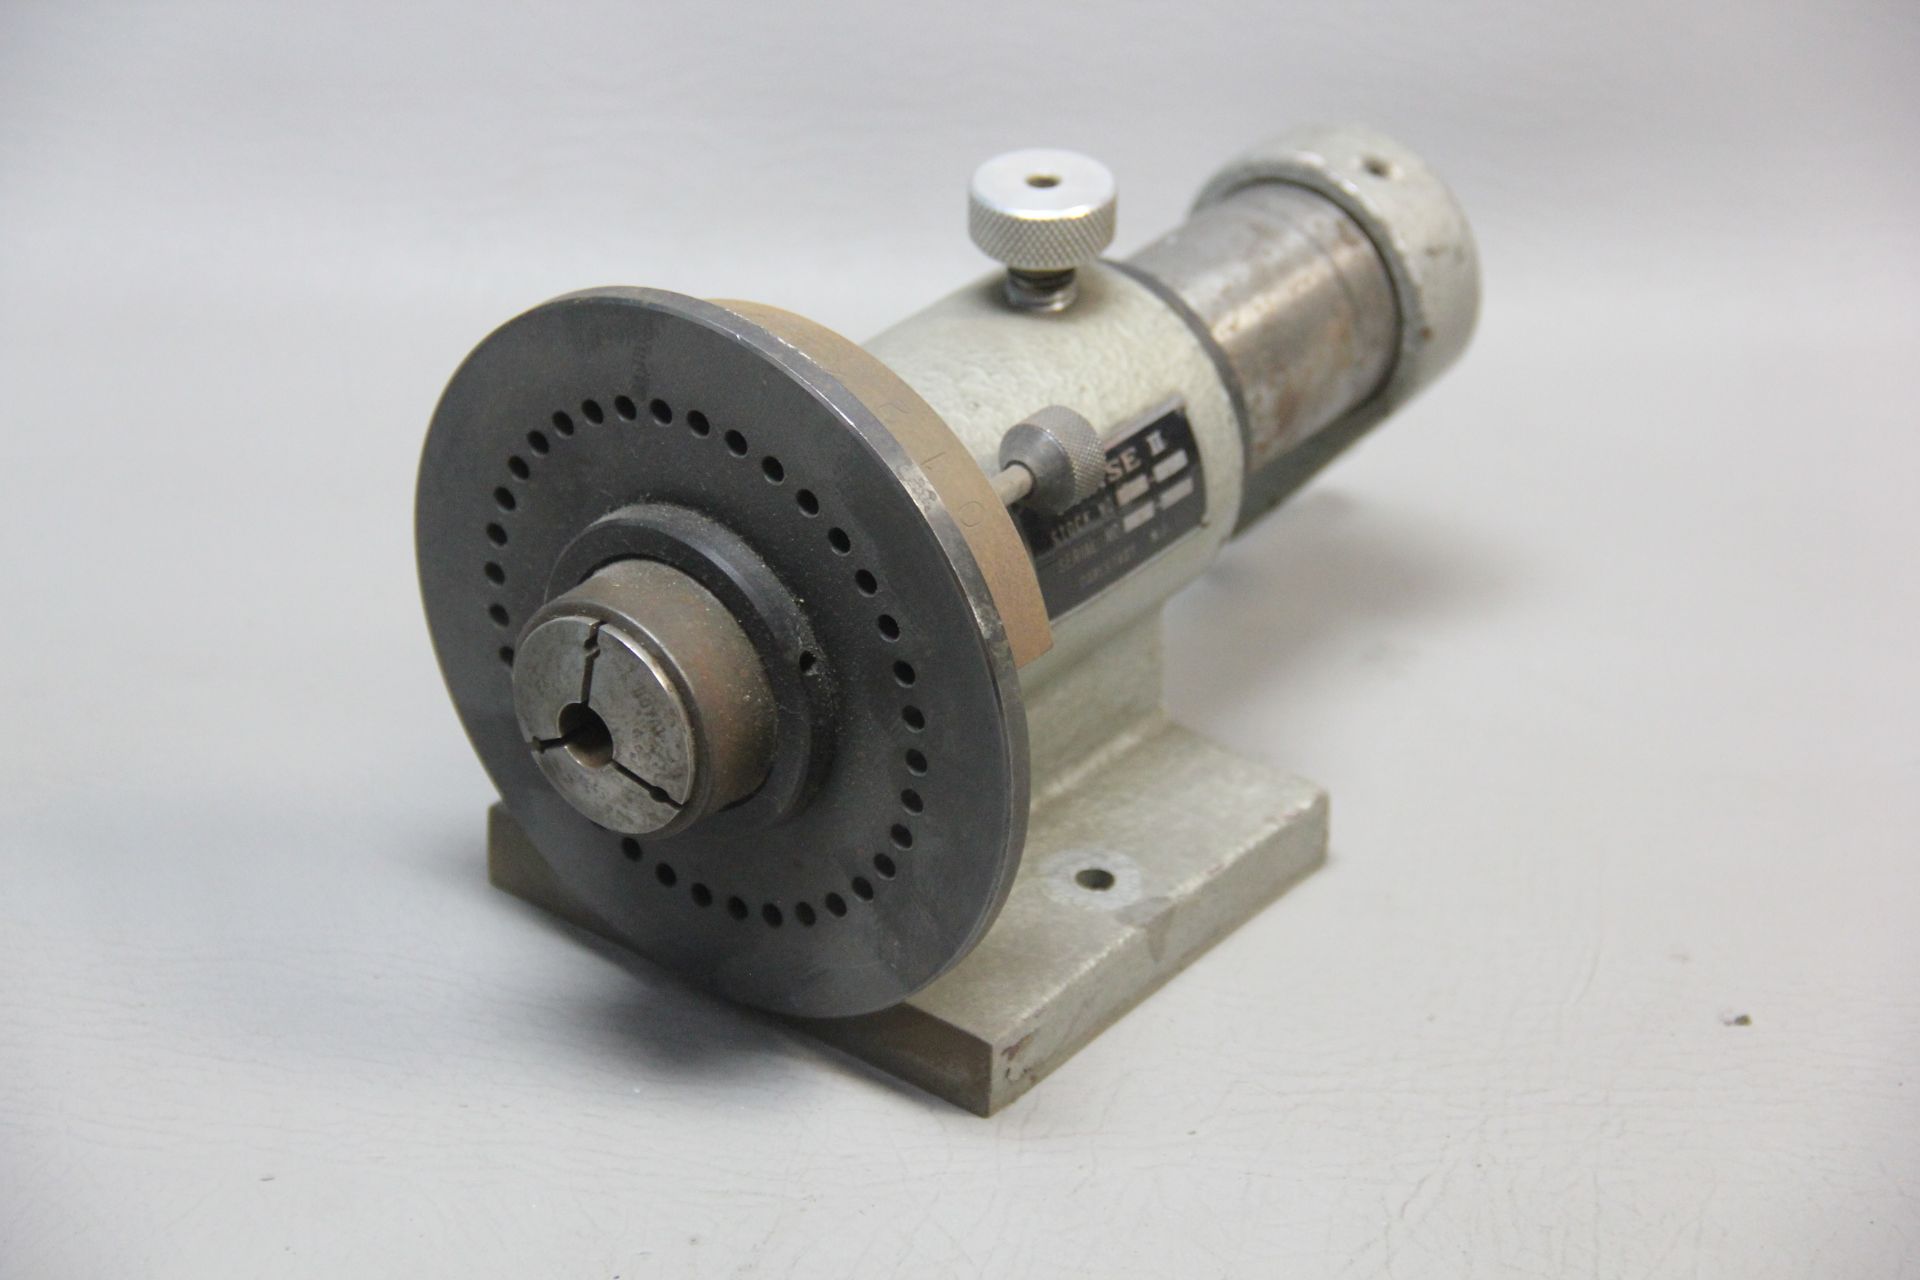 PHASE II COLLET INDEXING FIXTURE